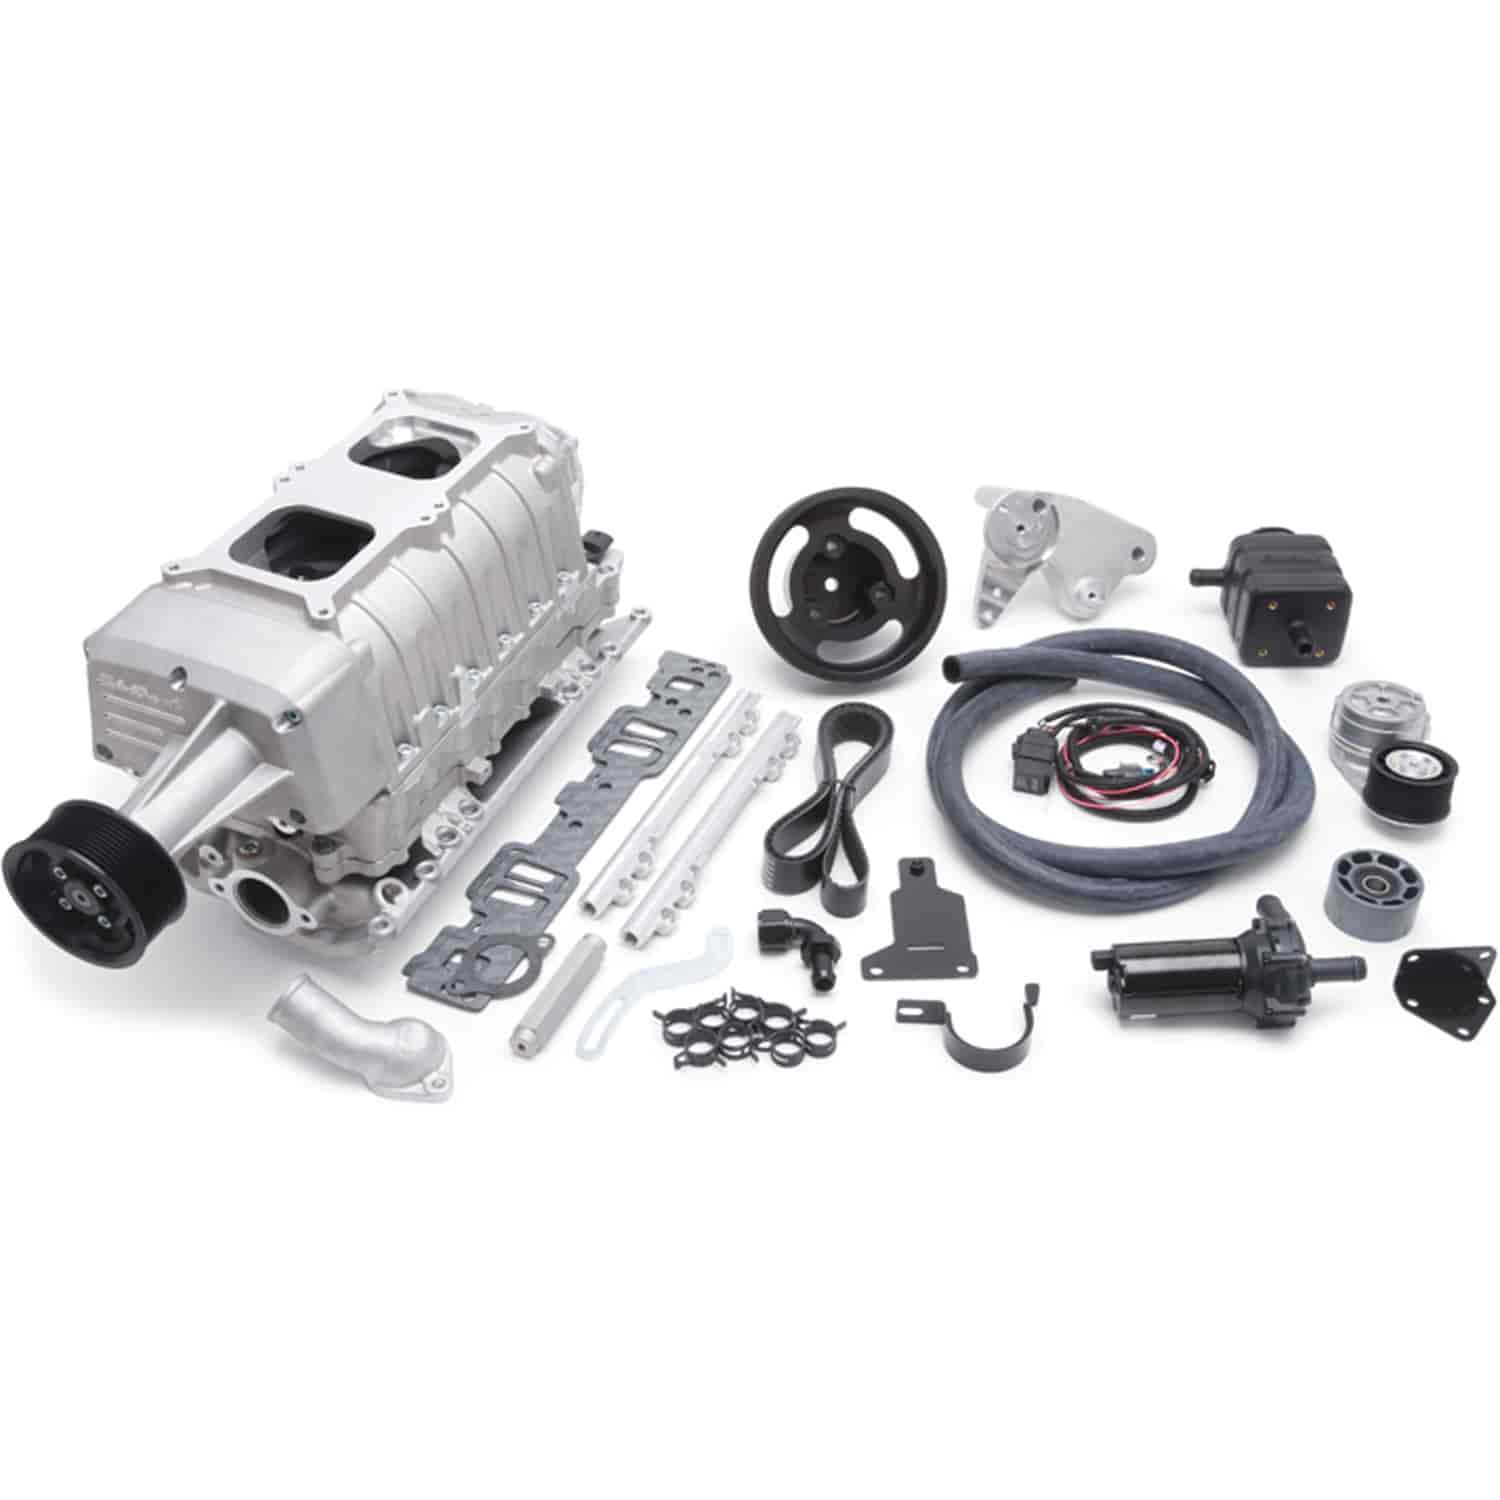 E-Force Enforcer RPM EFI Satin Supercharger Kit for 1955-1986 Small Block Chevy with Vortec Heads